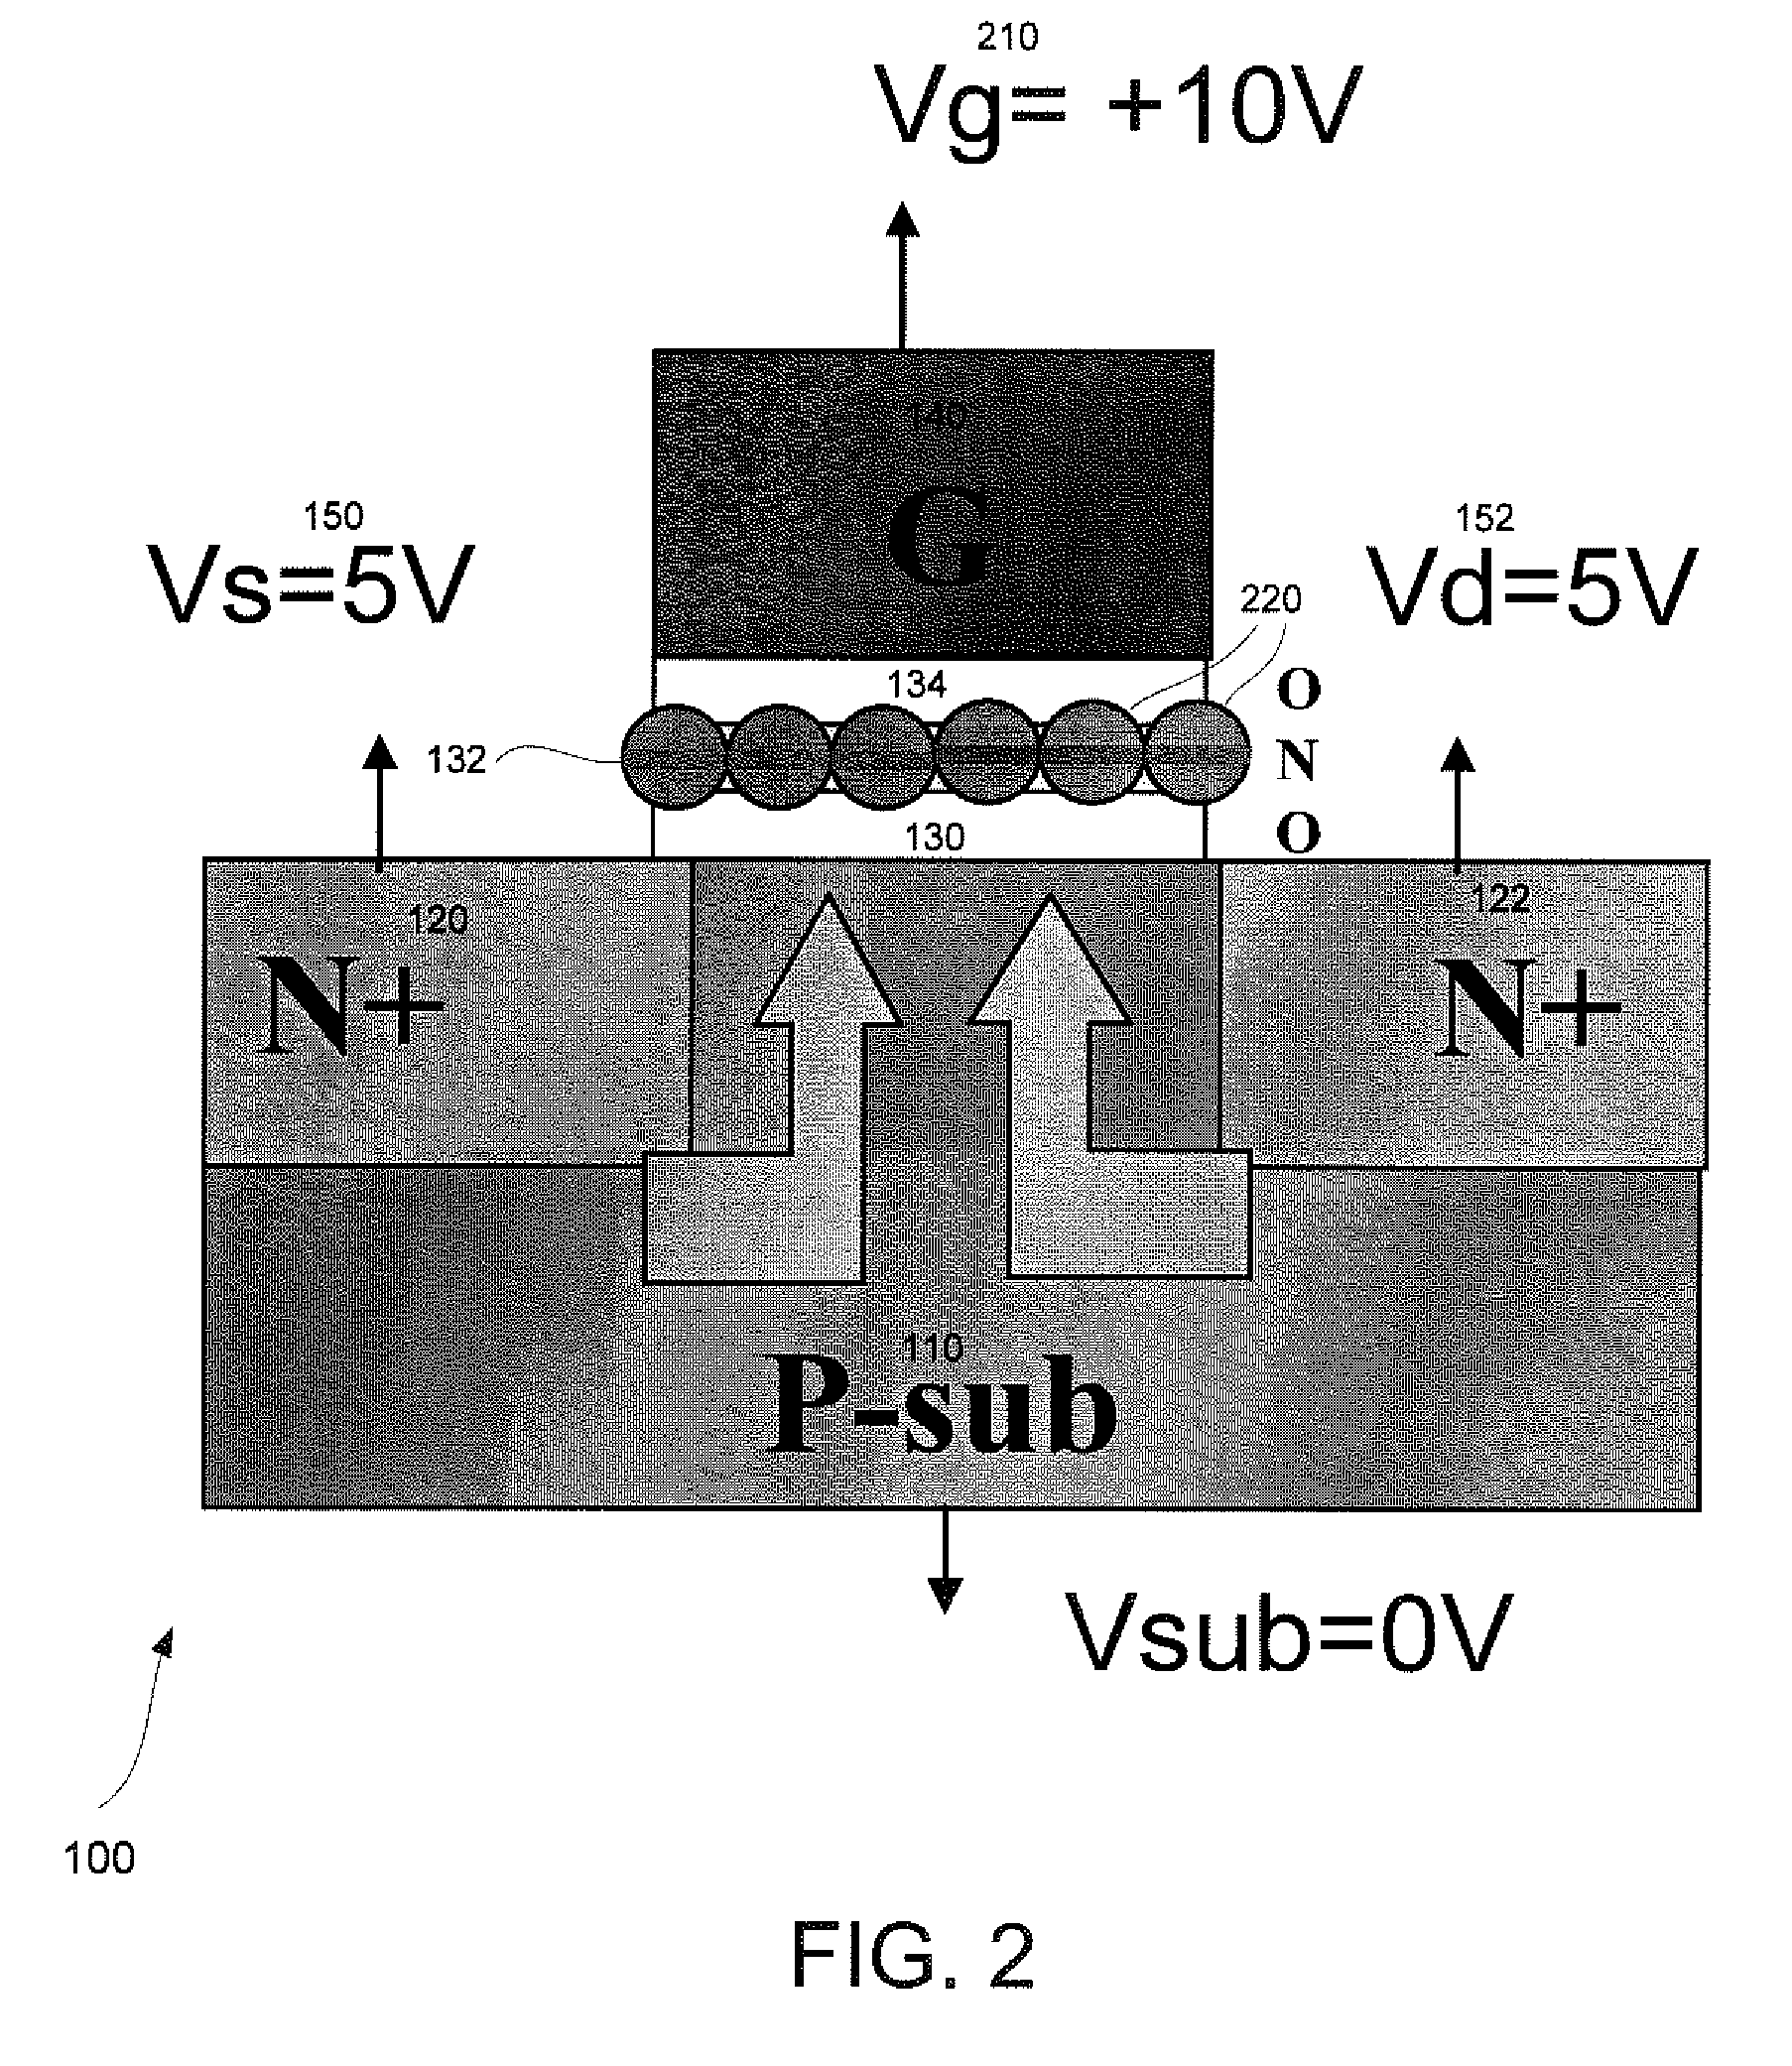 Double-Side-Bias Methods of Programming and Erasing a Virtual Ground Array Memory